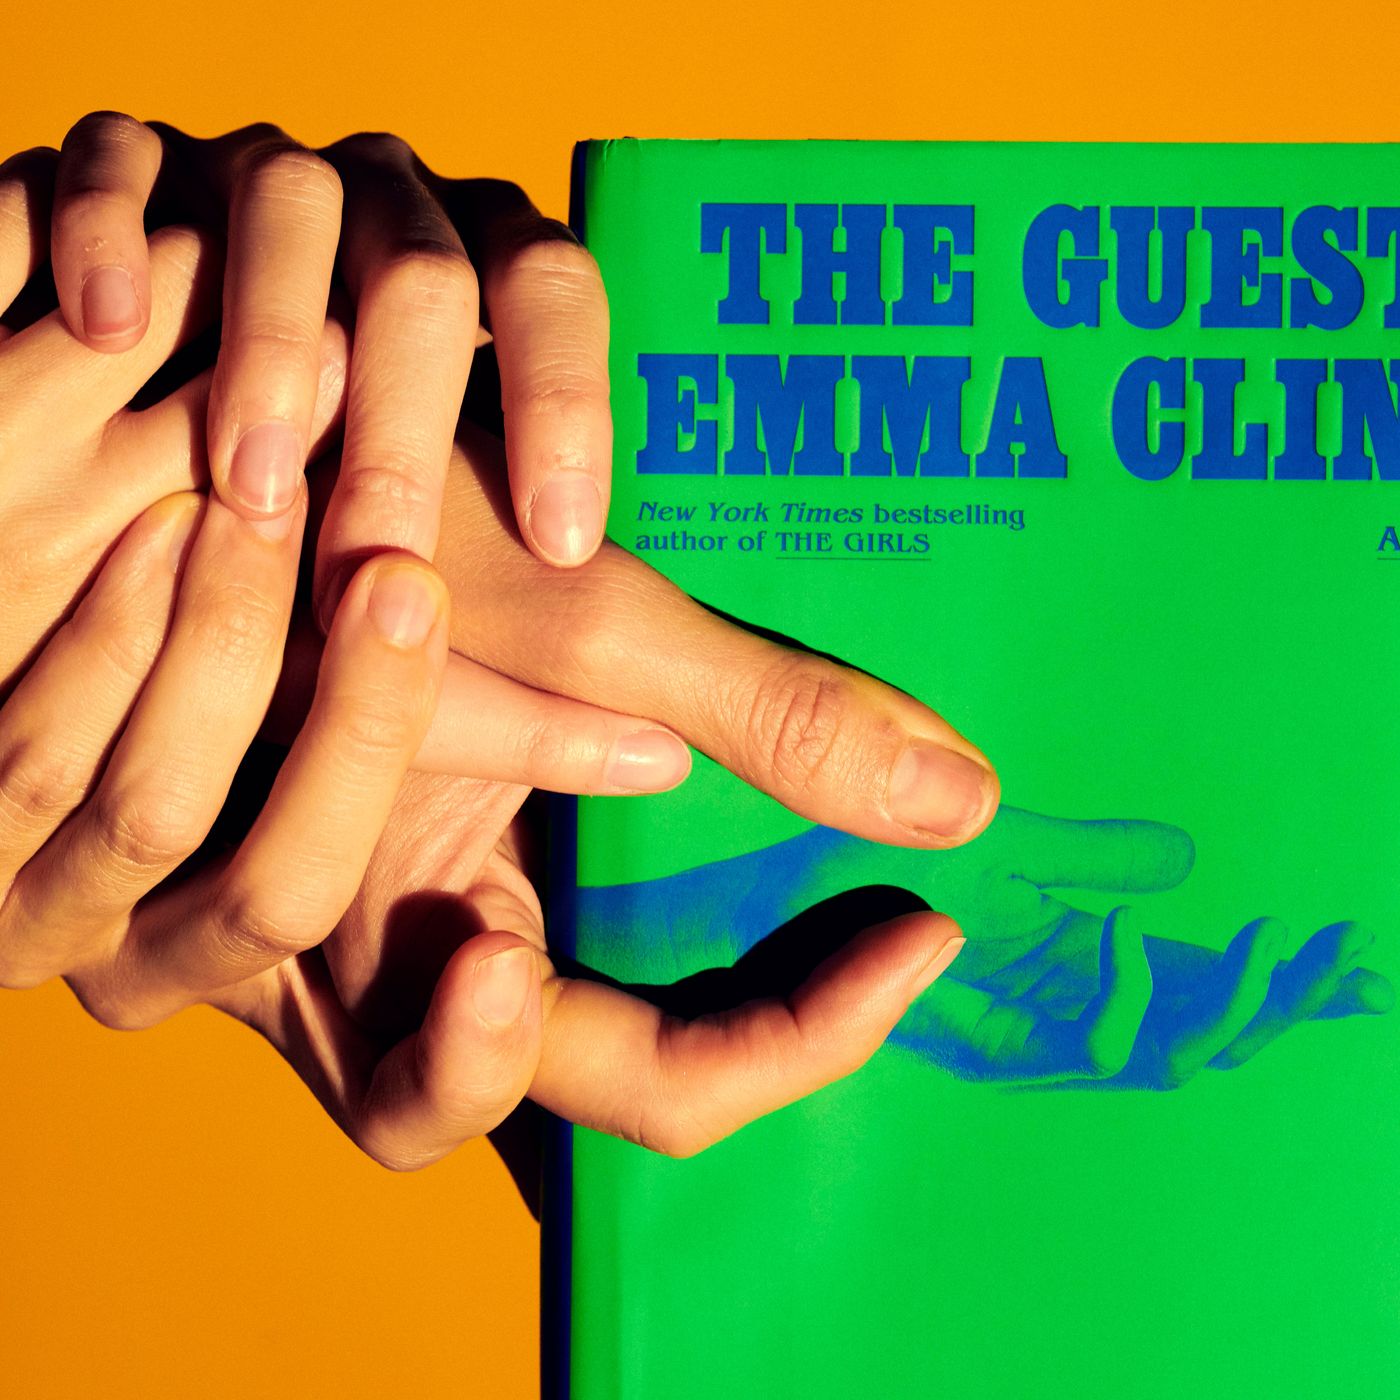 Discussing Emma Clines The Guest, Chapters 9 through 11